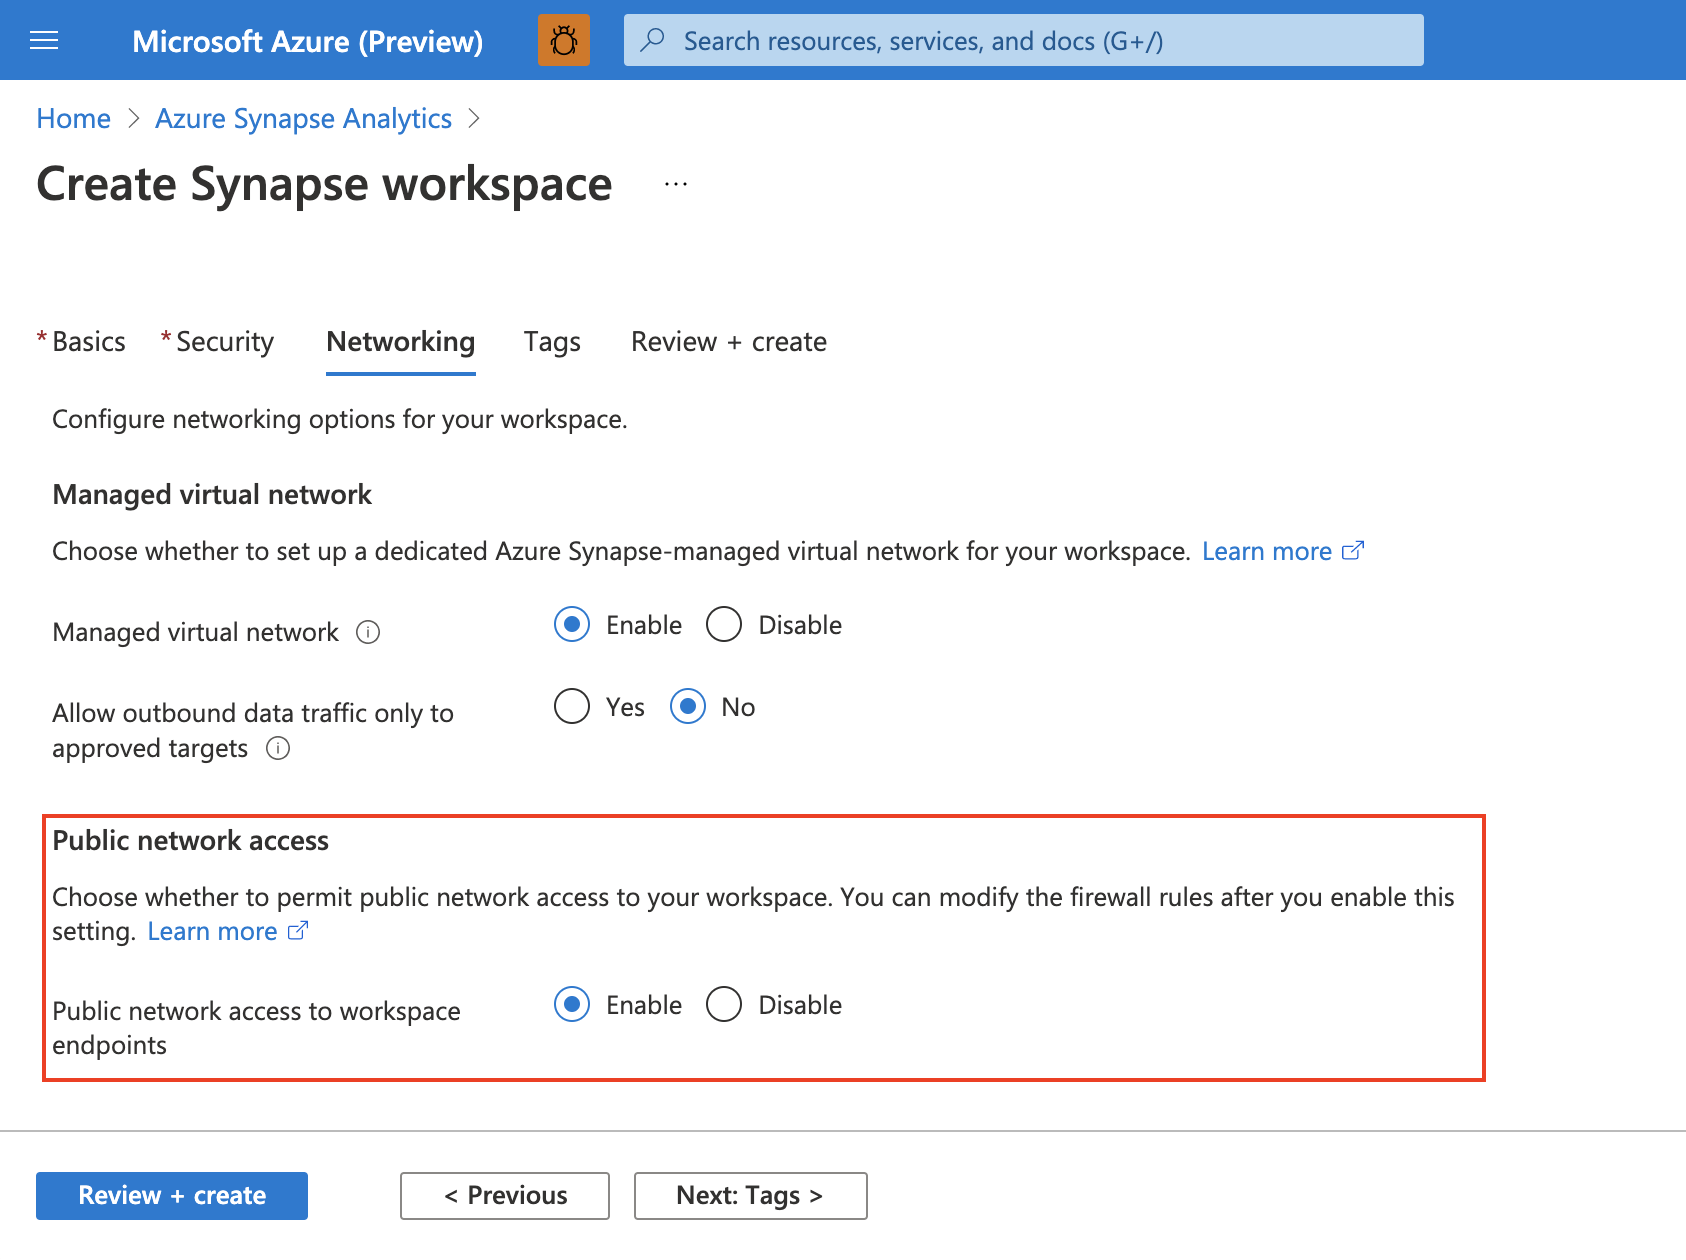 Create Synapse workspace, networking tab, public network access setting